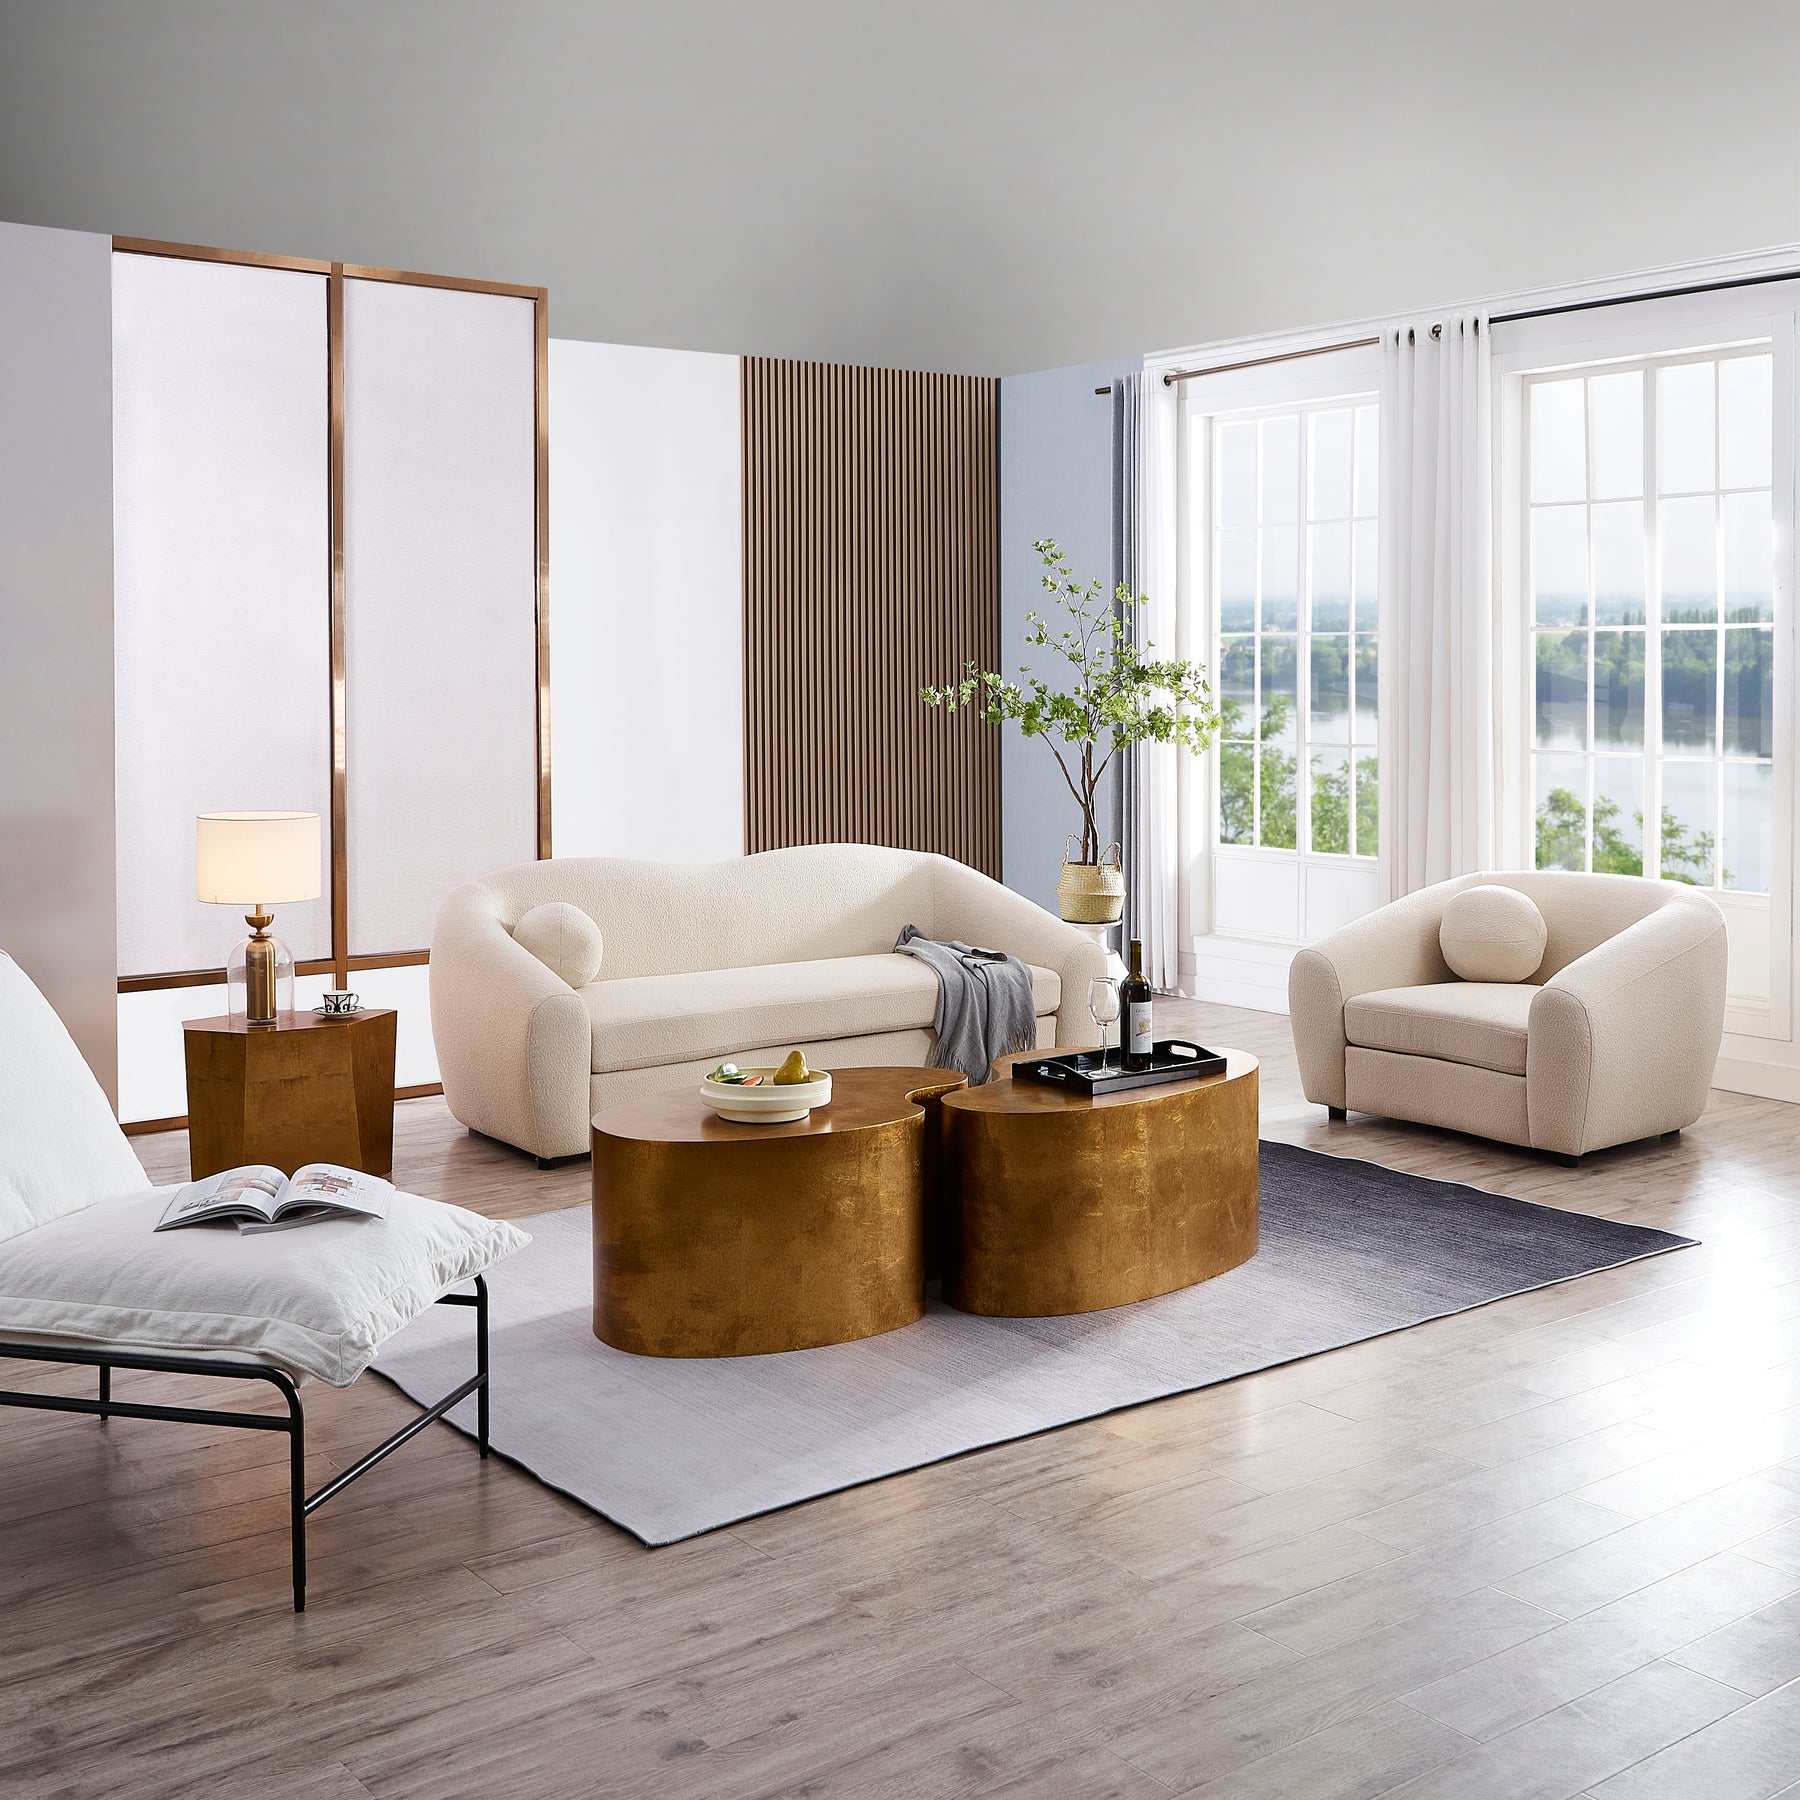 Louis Natural White Boucle Armchair and 3 Seater Sofa Side View in a Room Setting